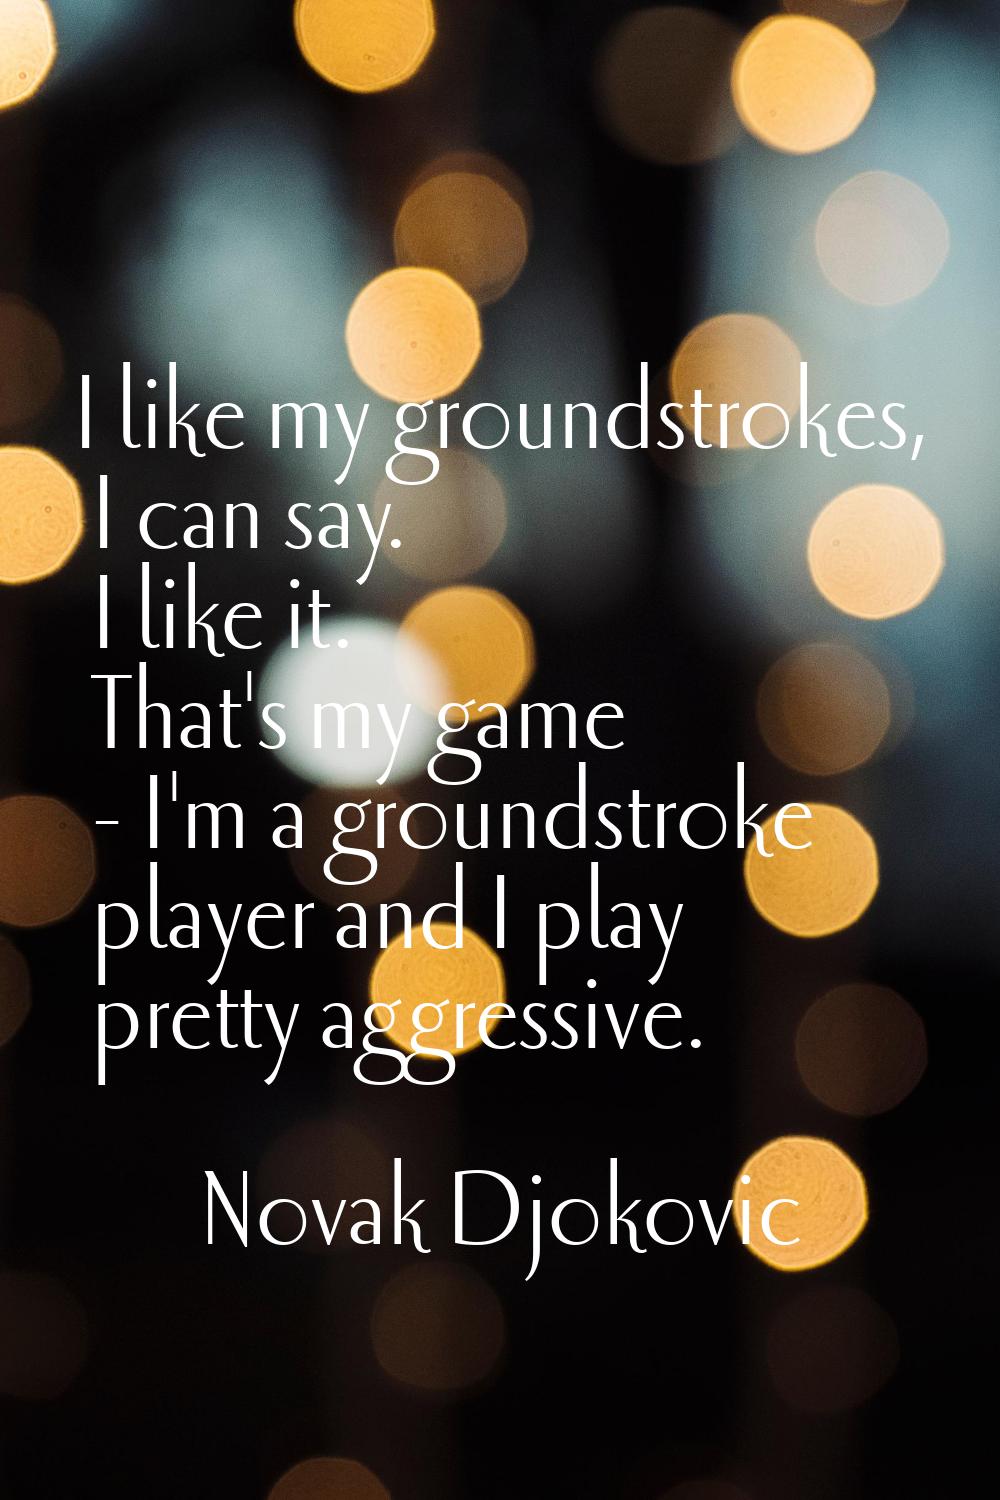 I like my groundstrokes, I can say. I like it. That's my game - I'm a groundstroke player and I pla